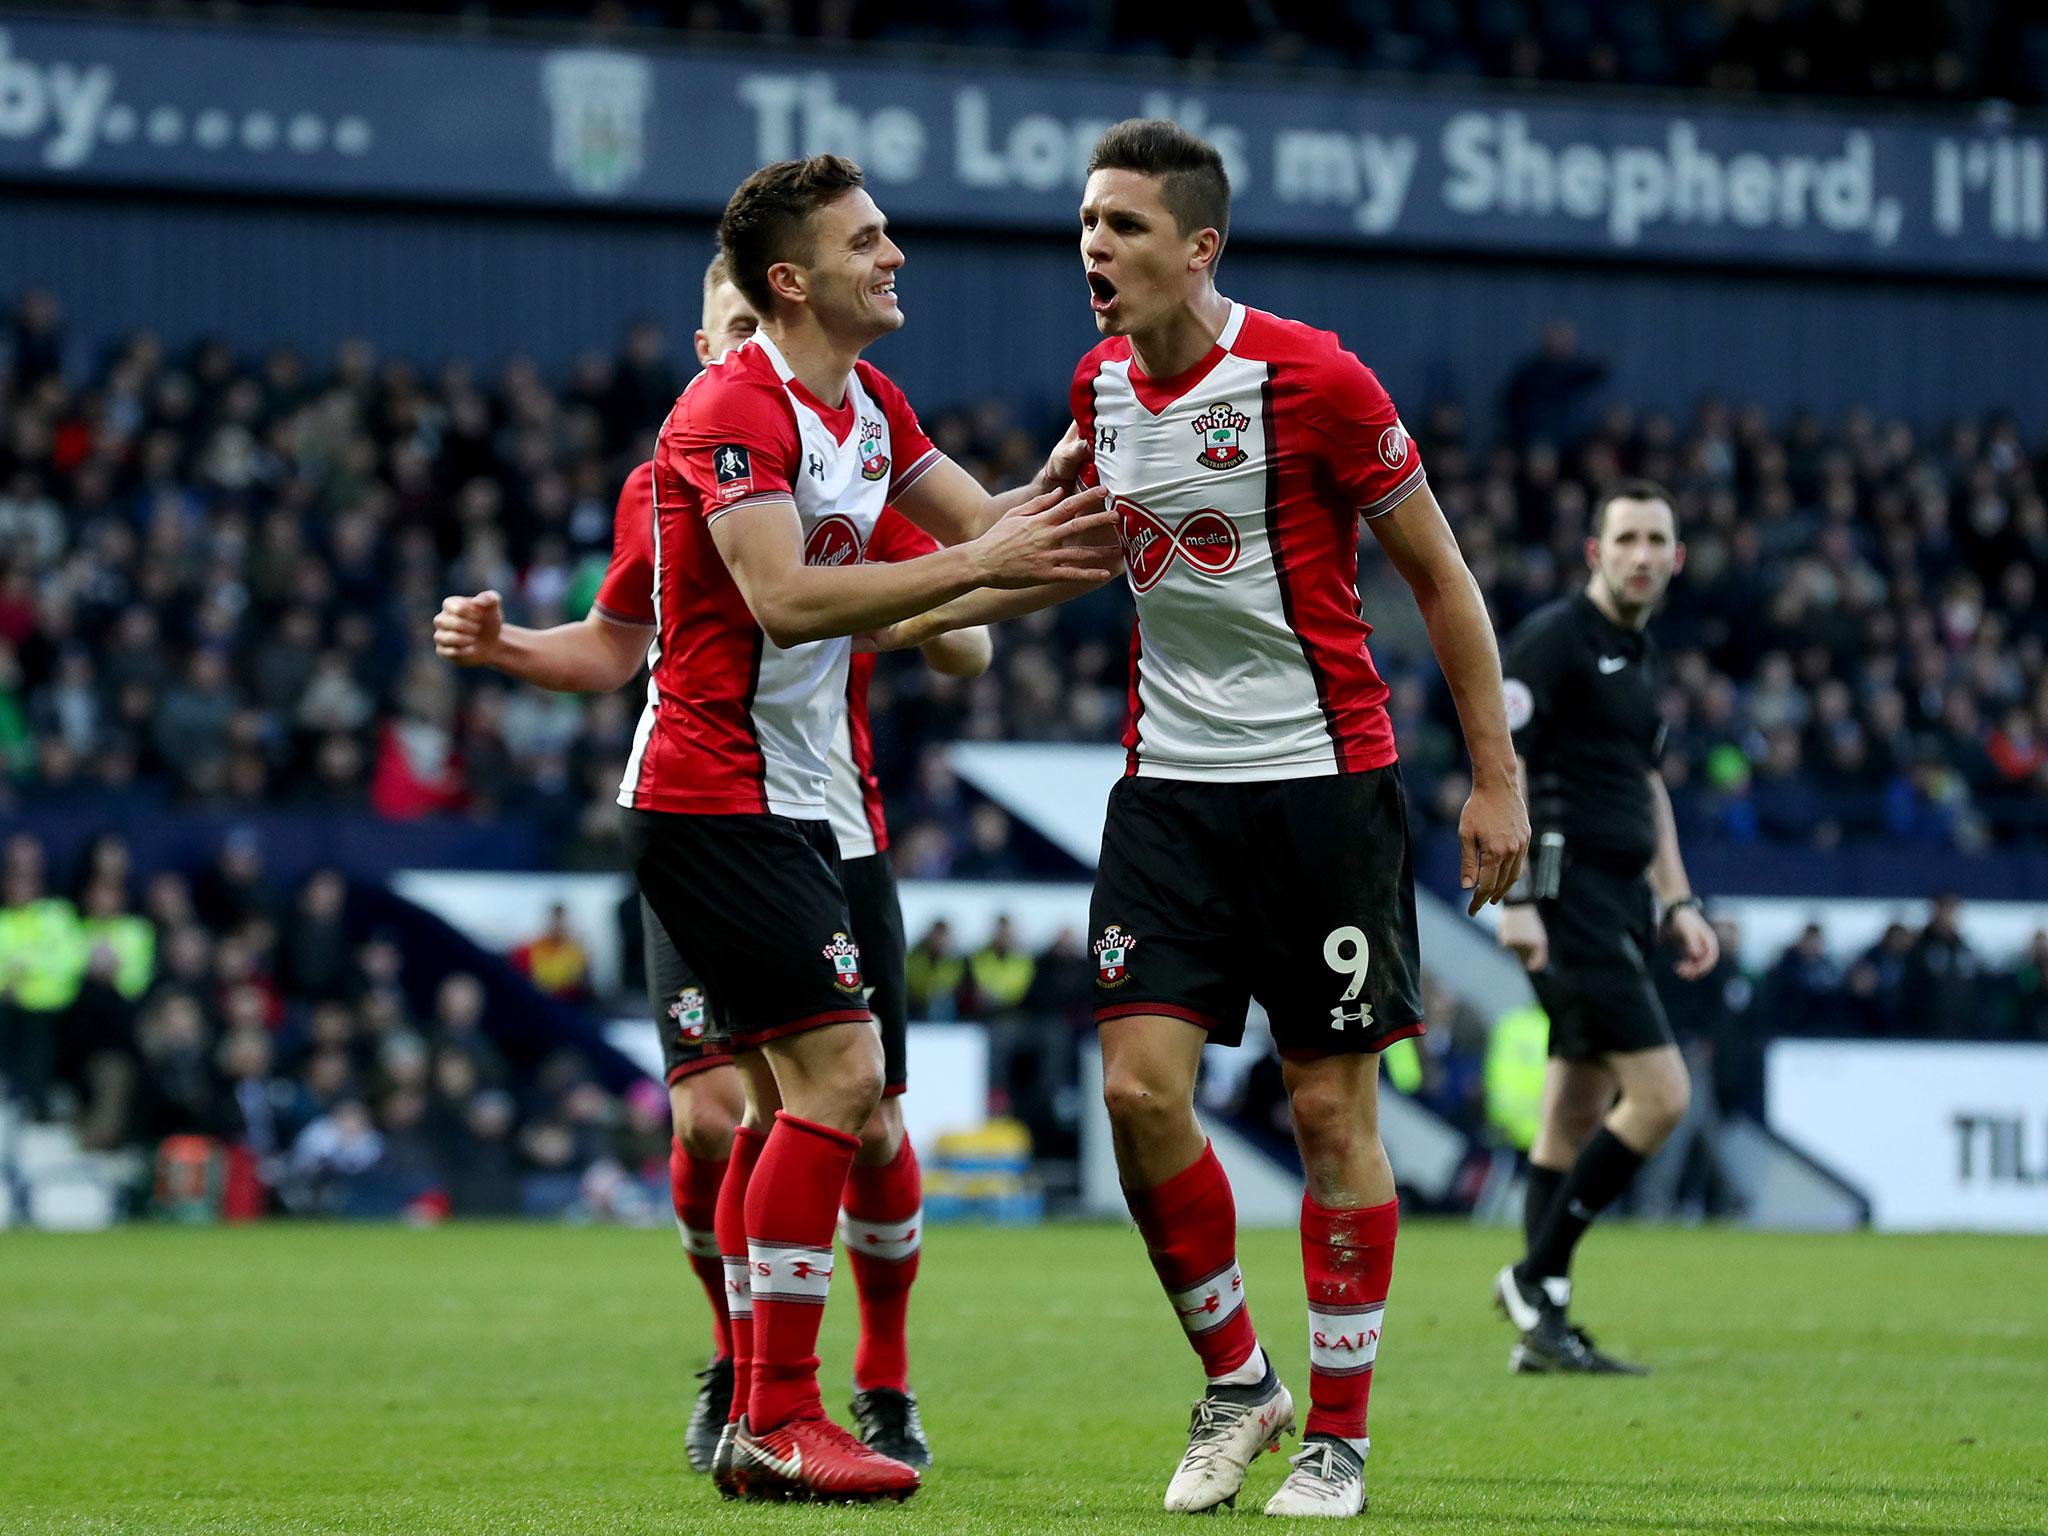 Southampton are now through to the last eight of the FA Cup